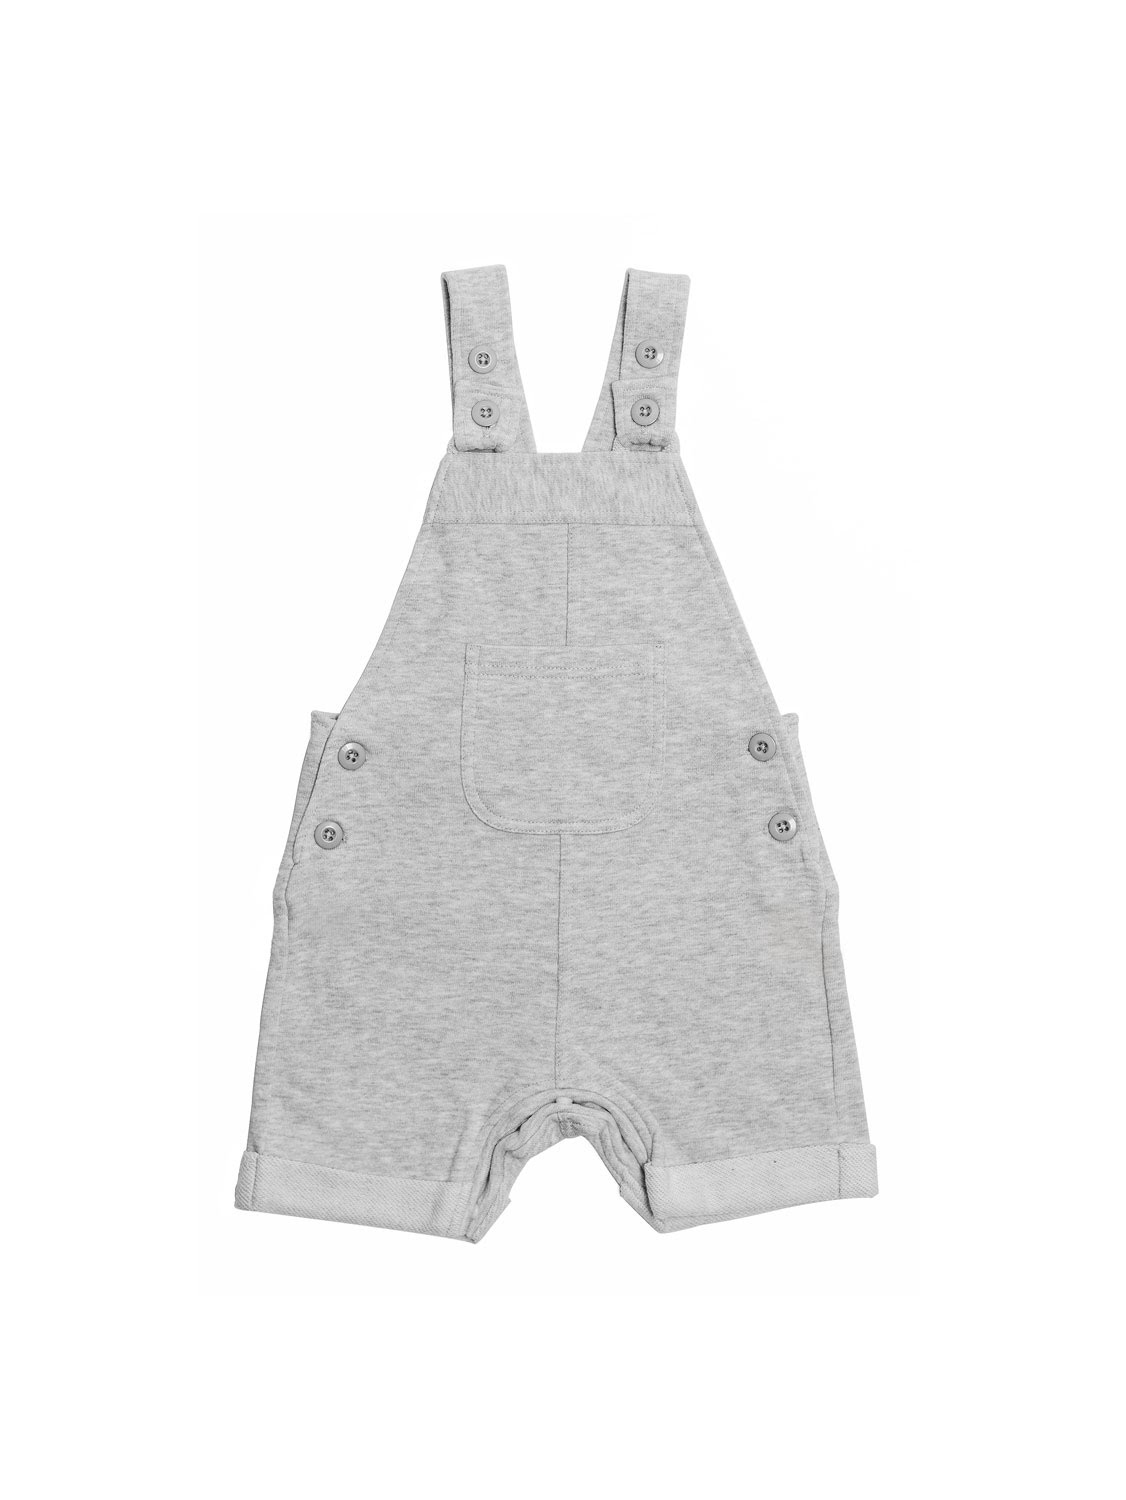 Nachuraru Grey Jumpsuit with Pocket 6 Months to 5 Years Old